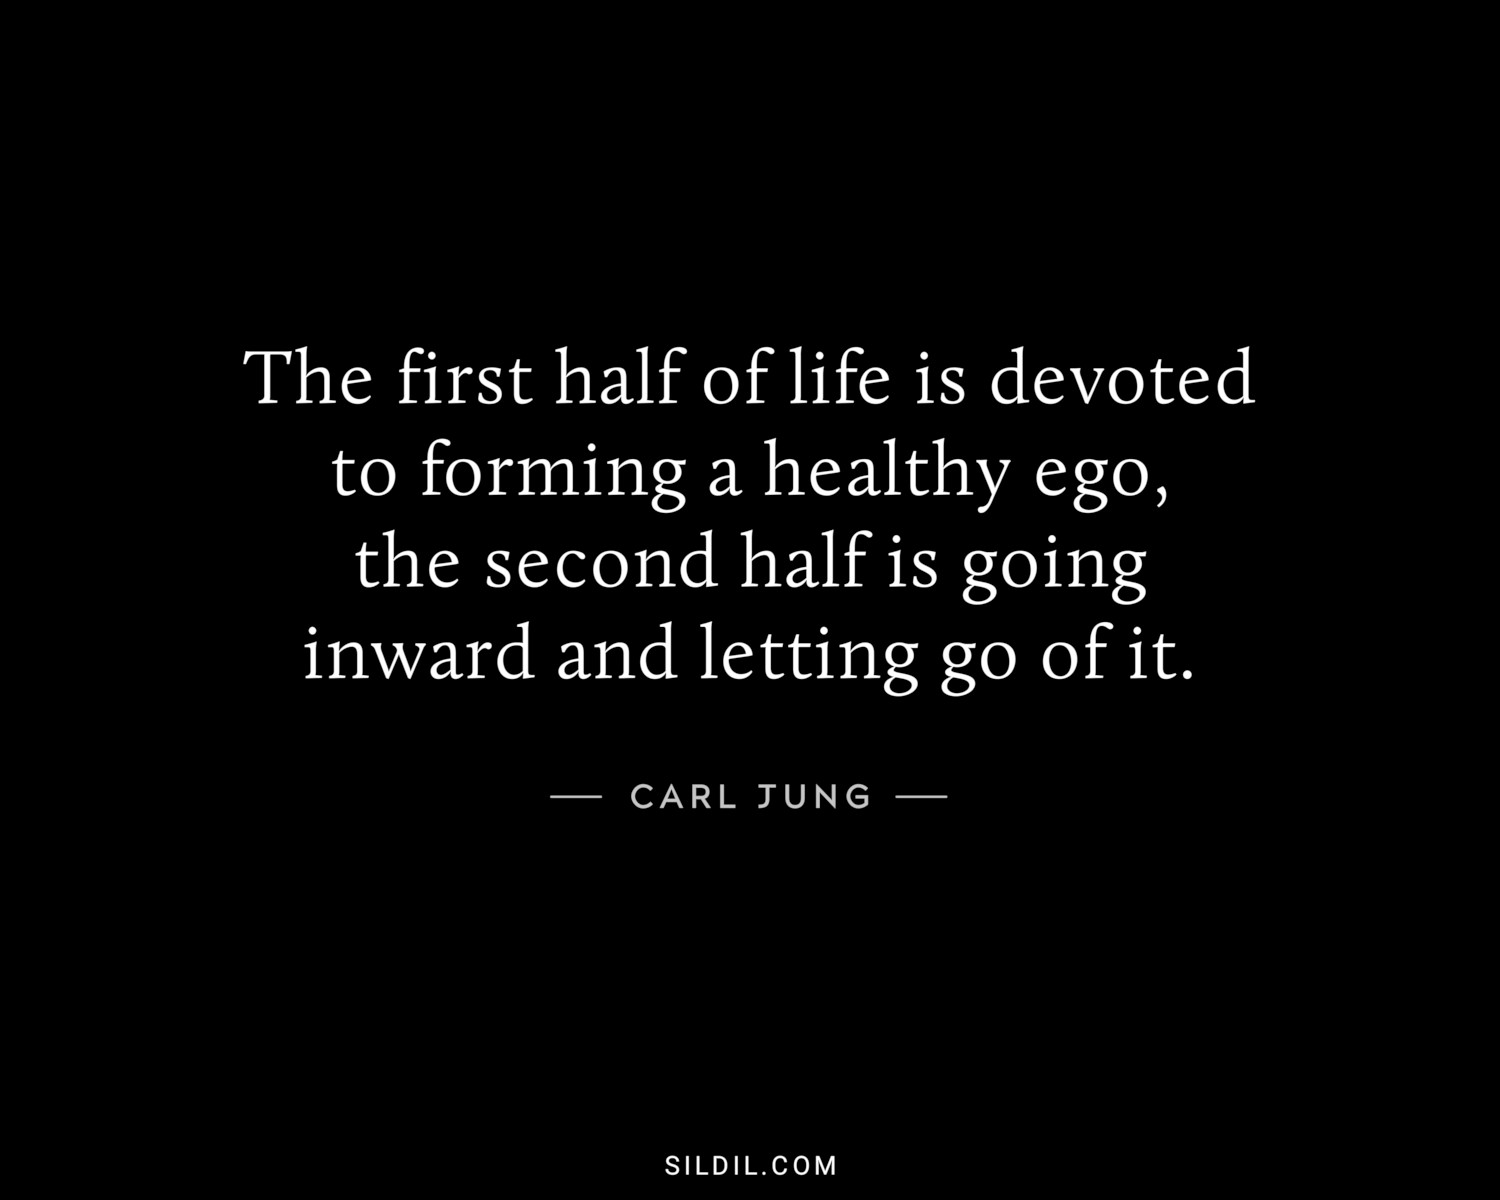 The first half of life is devoted to forming a healthy ego, the second half is going inward and letting go of it.